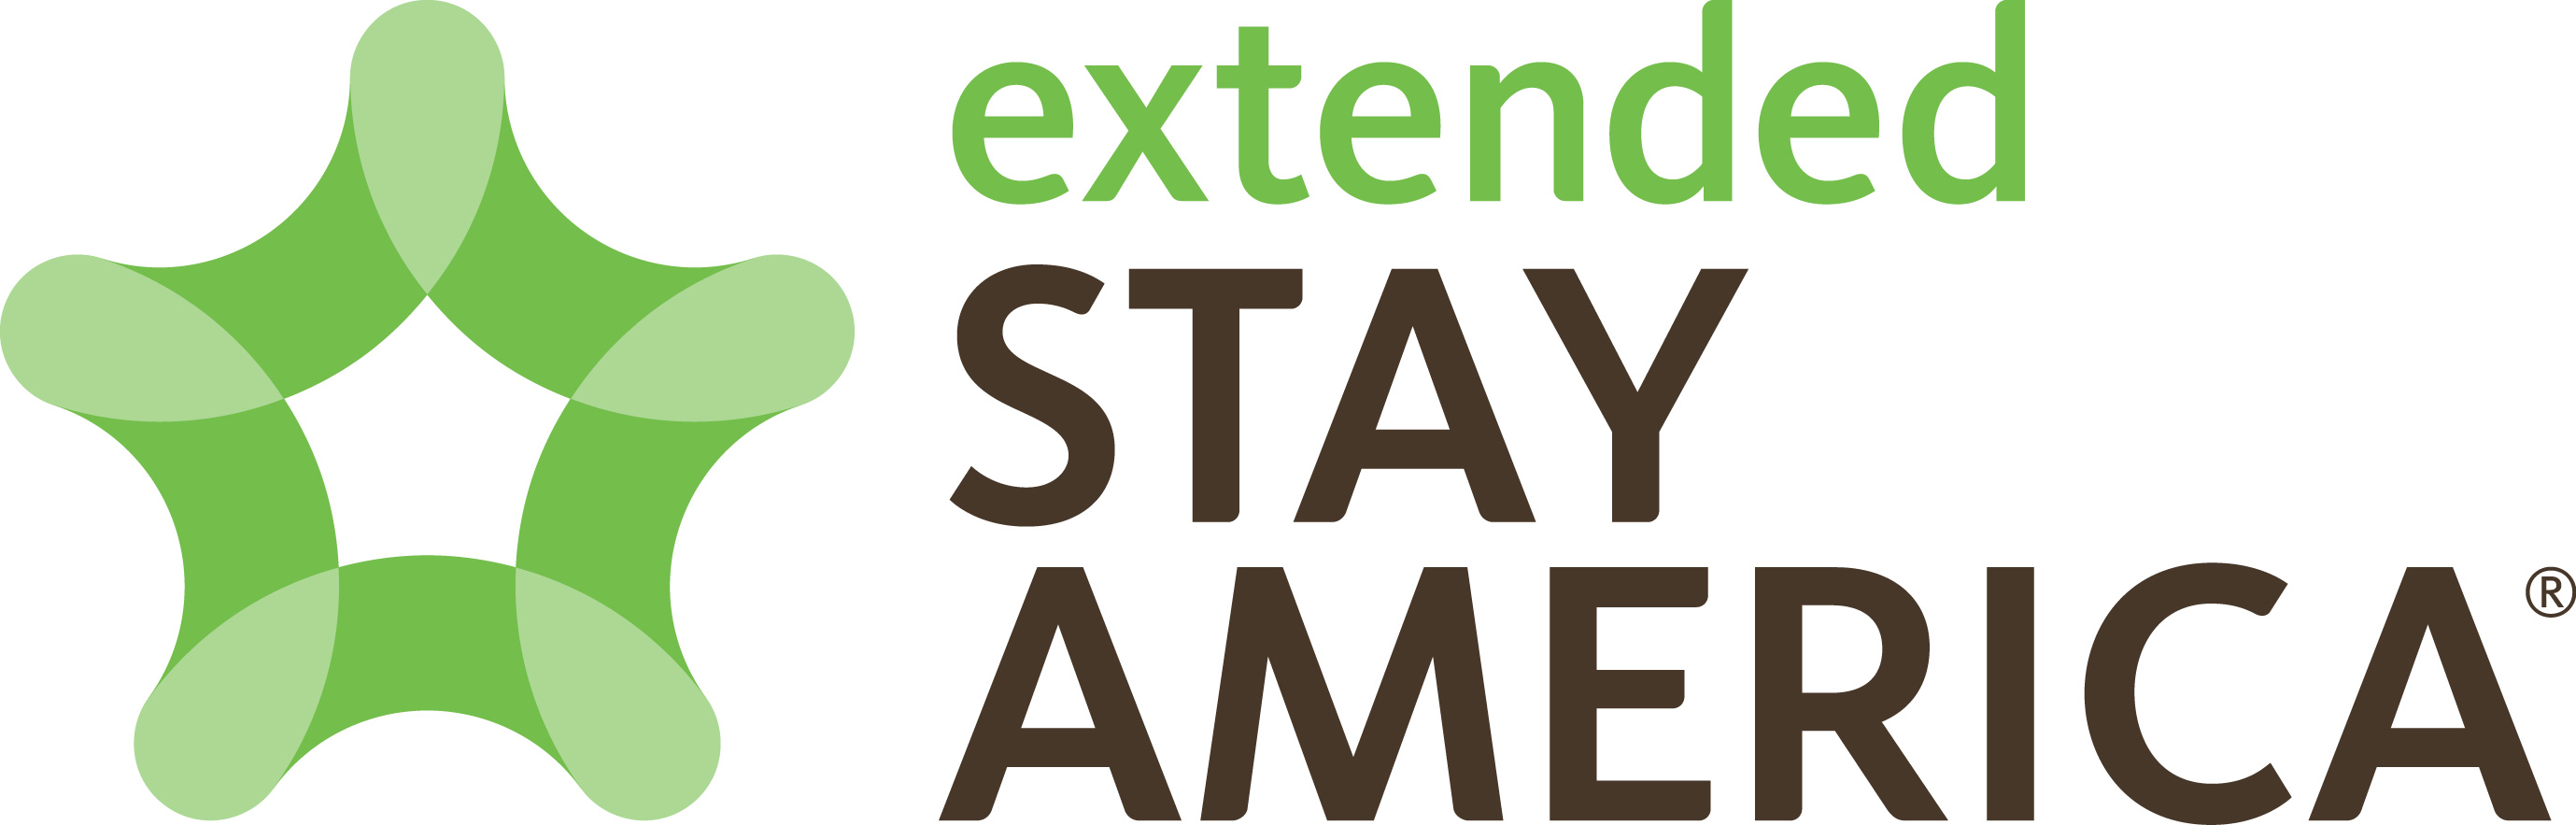 Extended Stay Americ